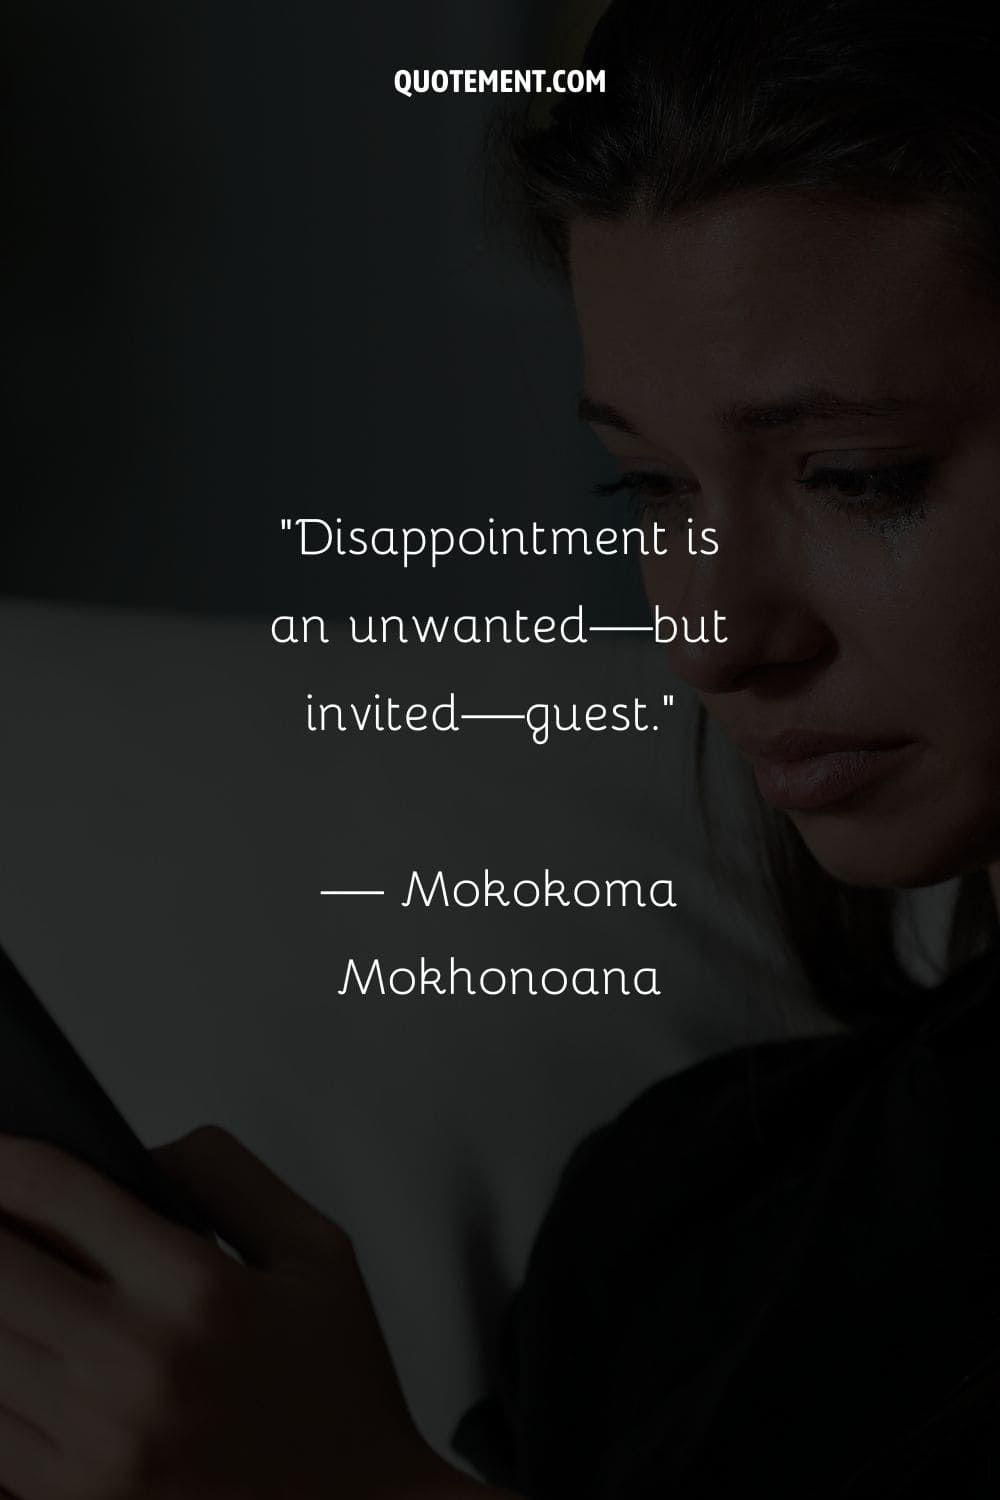 Disappointment is an unwanted—but invited—guest